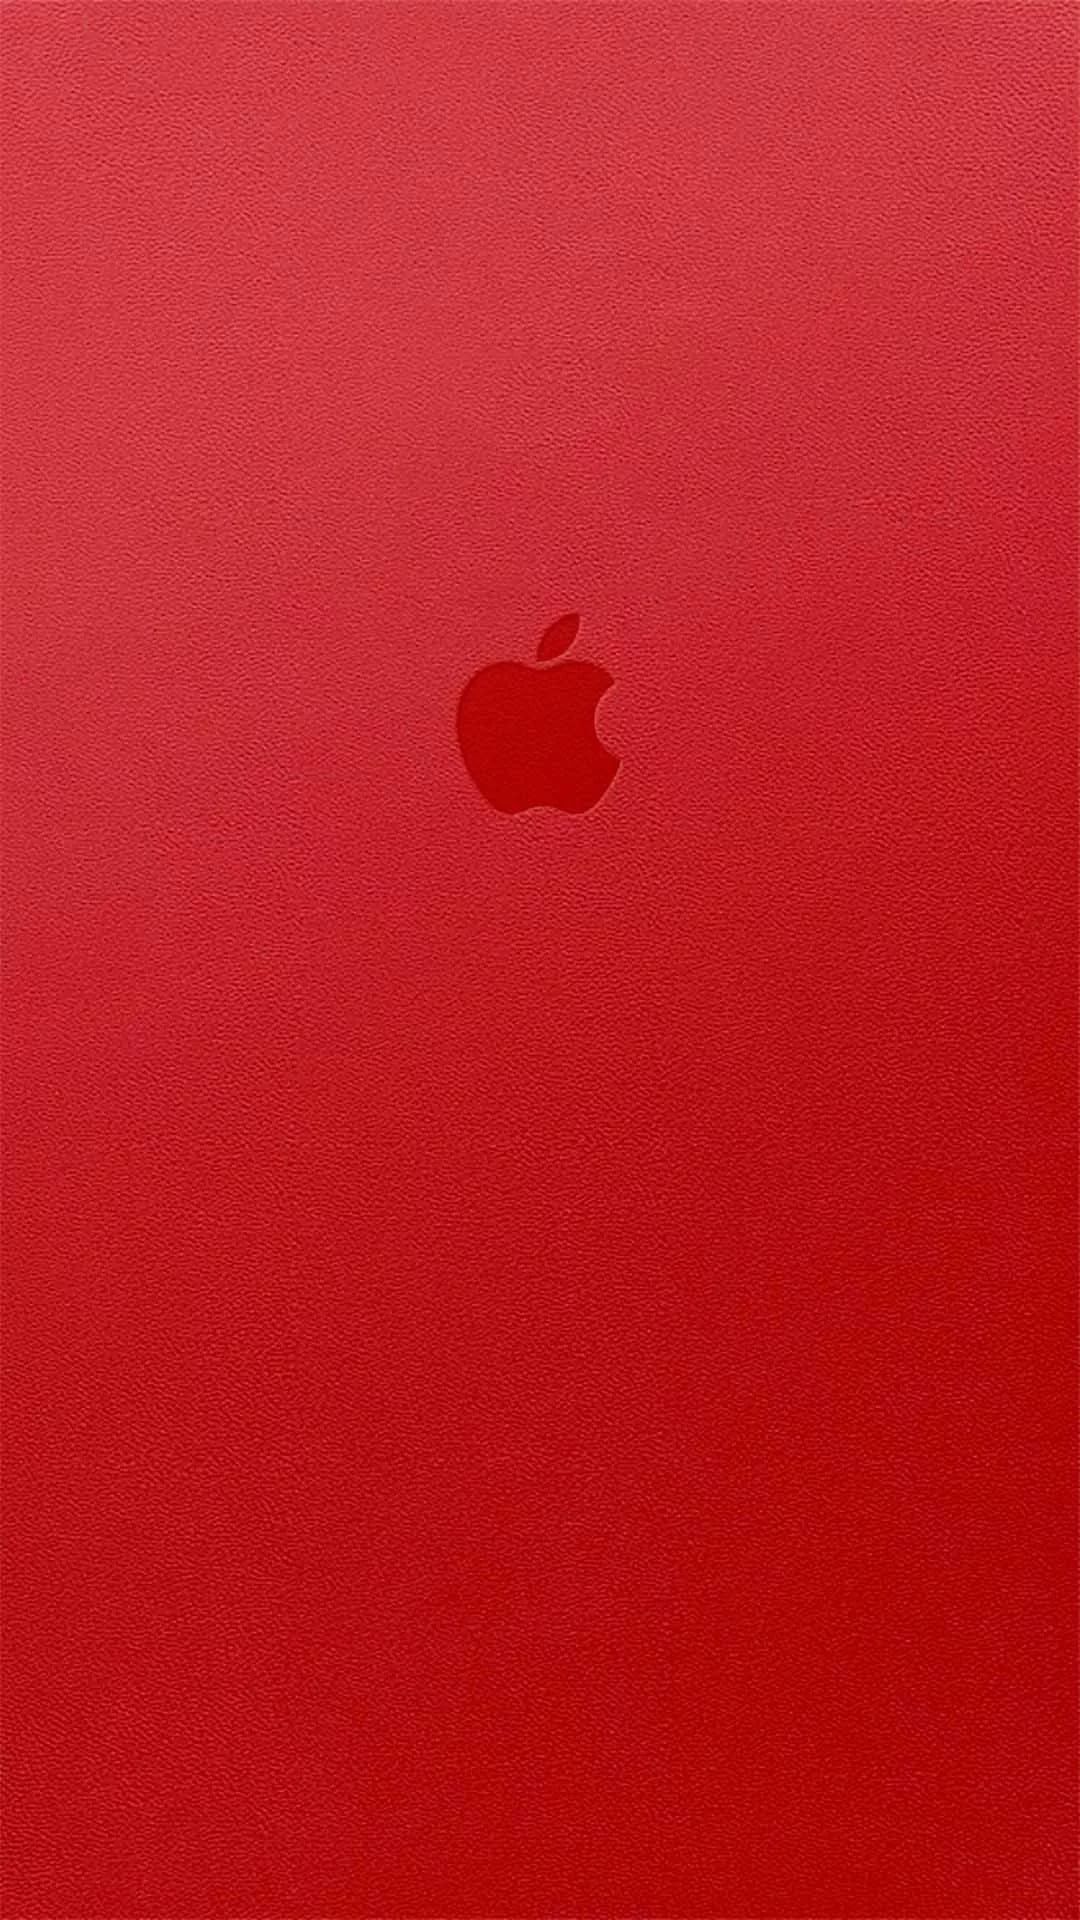 Red HD iPhone Wallpaper